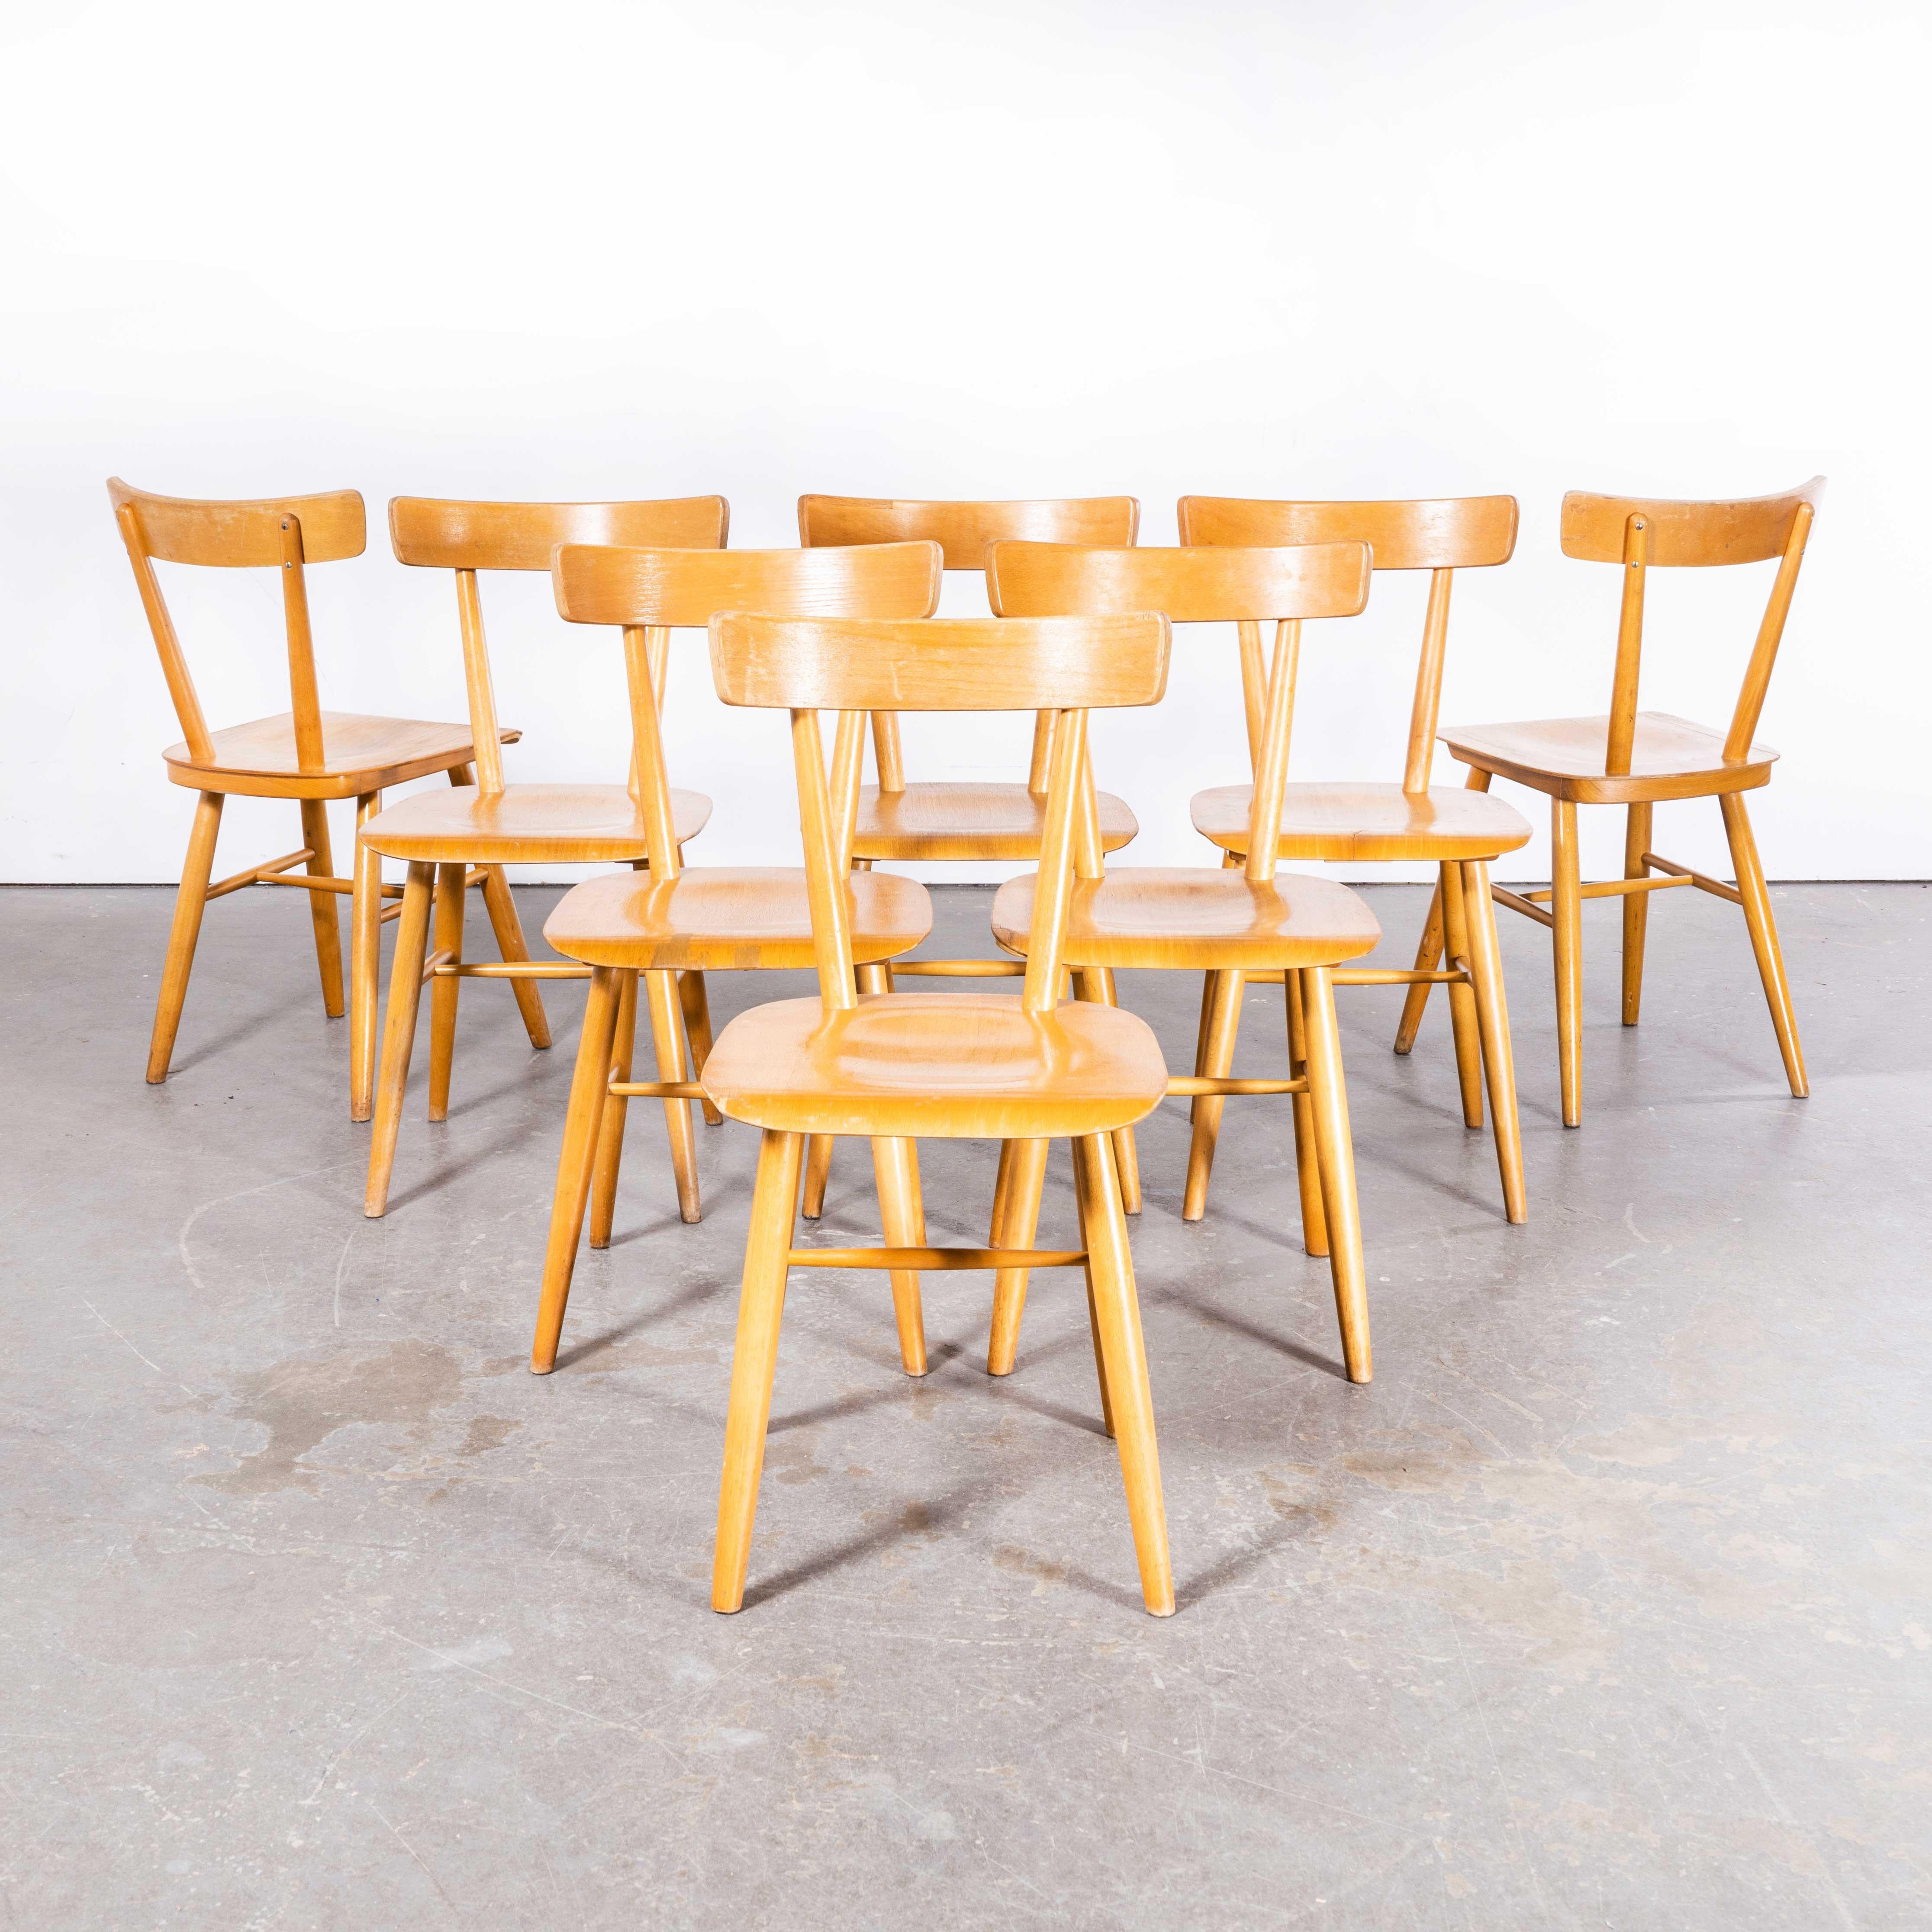 1960’s Beech Wood Dining Chair By Ton – Set Of Eight
1960’s Beech Wood Dining Chair By Ton – Set Of Eight. These chairs were produced by the famous Czech firm Ton, still trading today and producing beautiful chairs, they are an offshoot of Thonet.